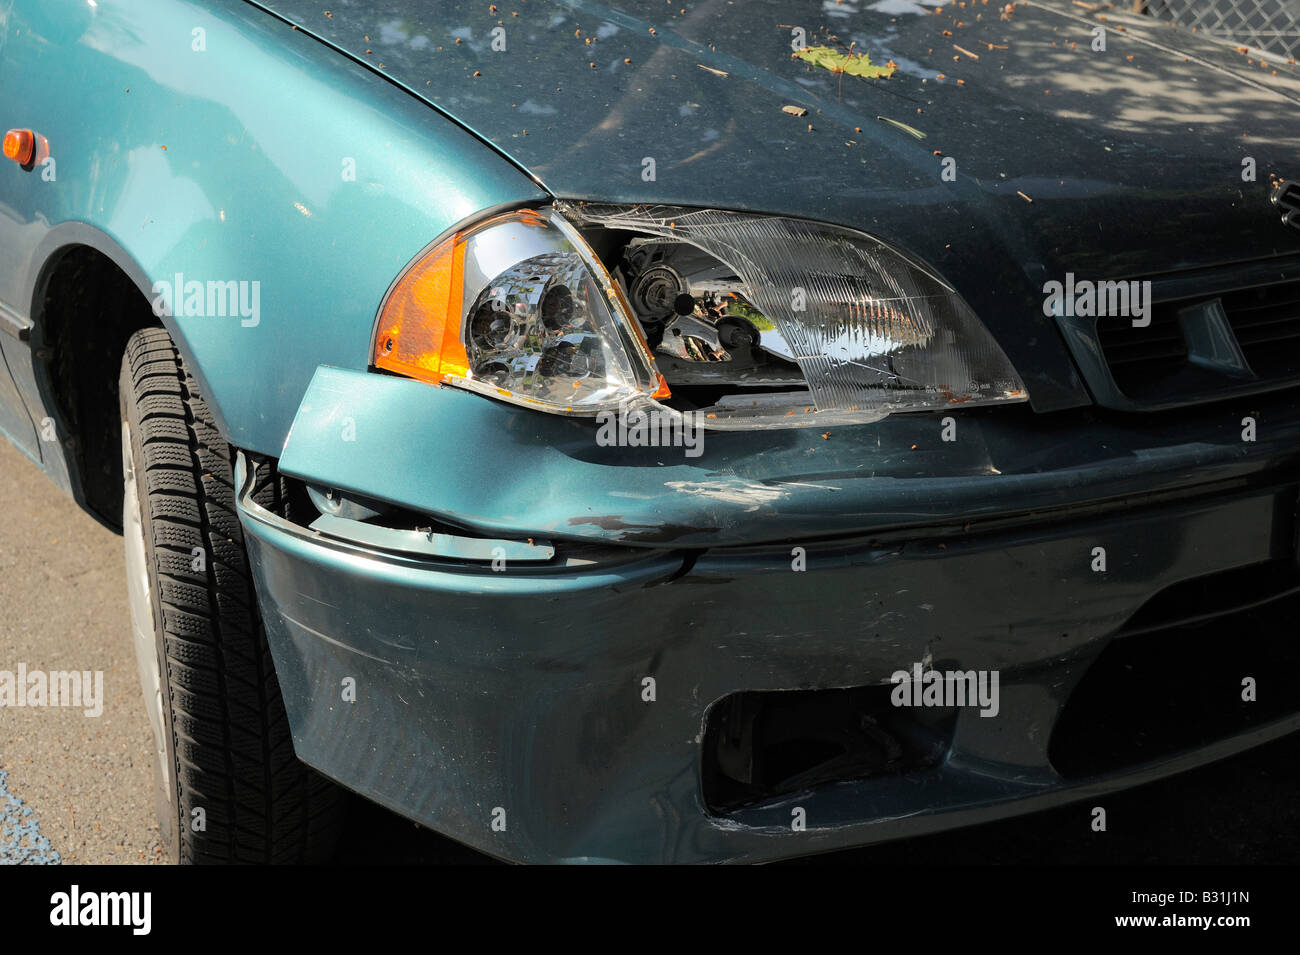 a damaged front of a car Stock Photo